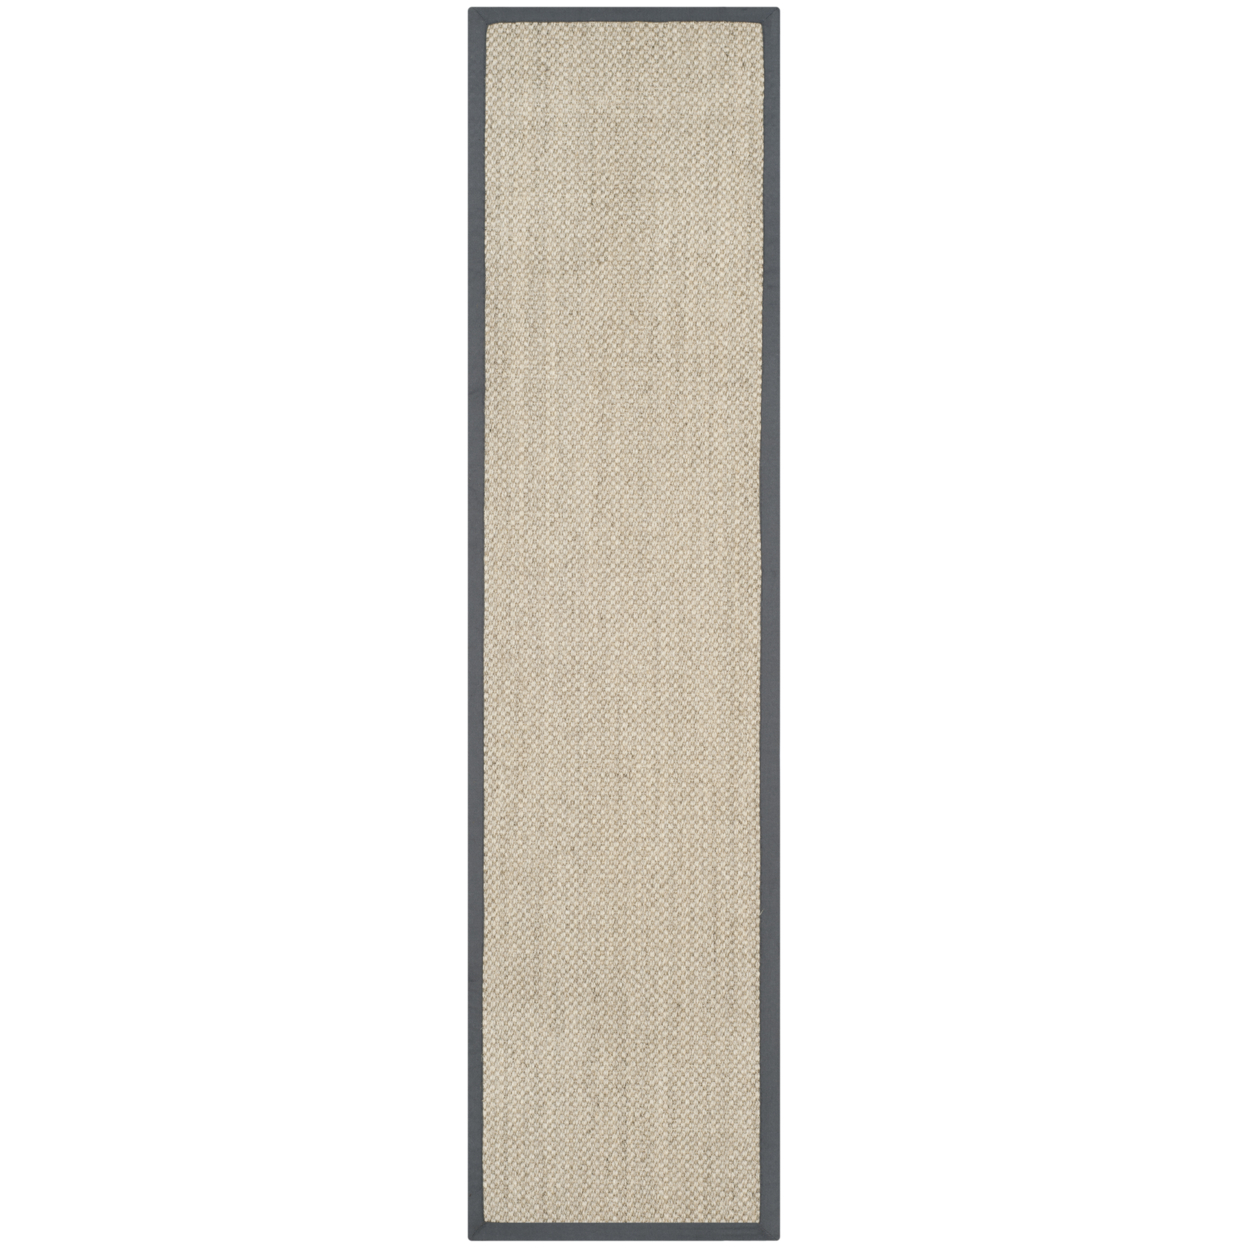 SAFAVIEH Natural Fiber Collection NF443B Marble/Grey Rug - 2' 6 X 10'